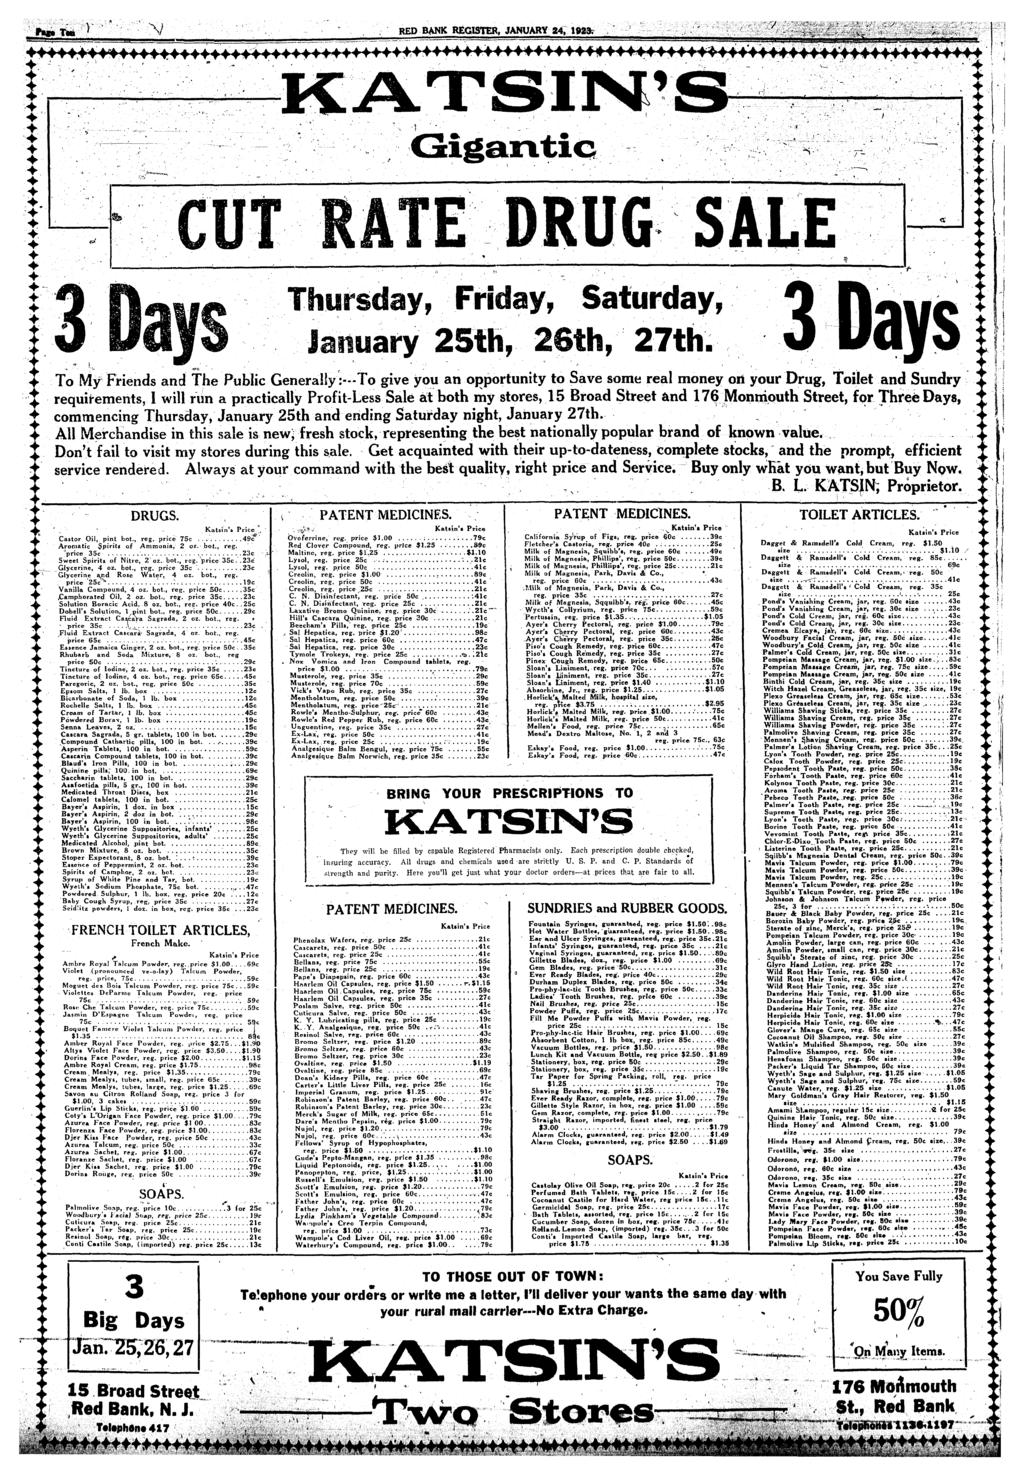 RED BANK REGSTER, JANUARY 24, 1923. Gganc. ;. ; ;.;- w RUG SALE Thursday. Frday, Saurday. January 25h, 26h. 27h.